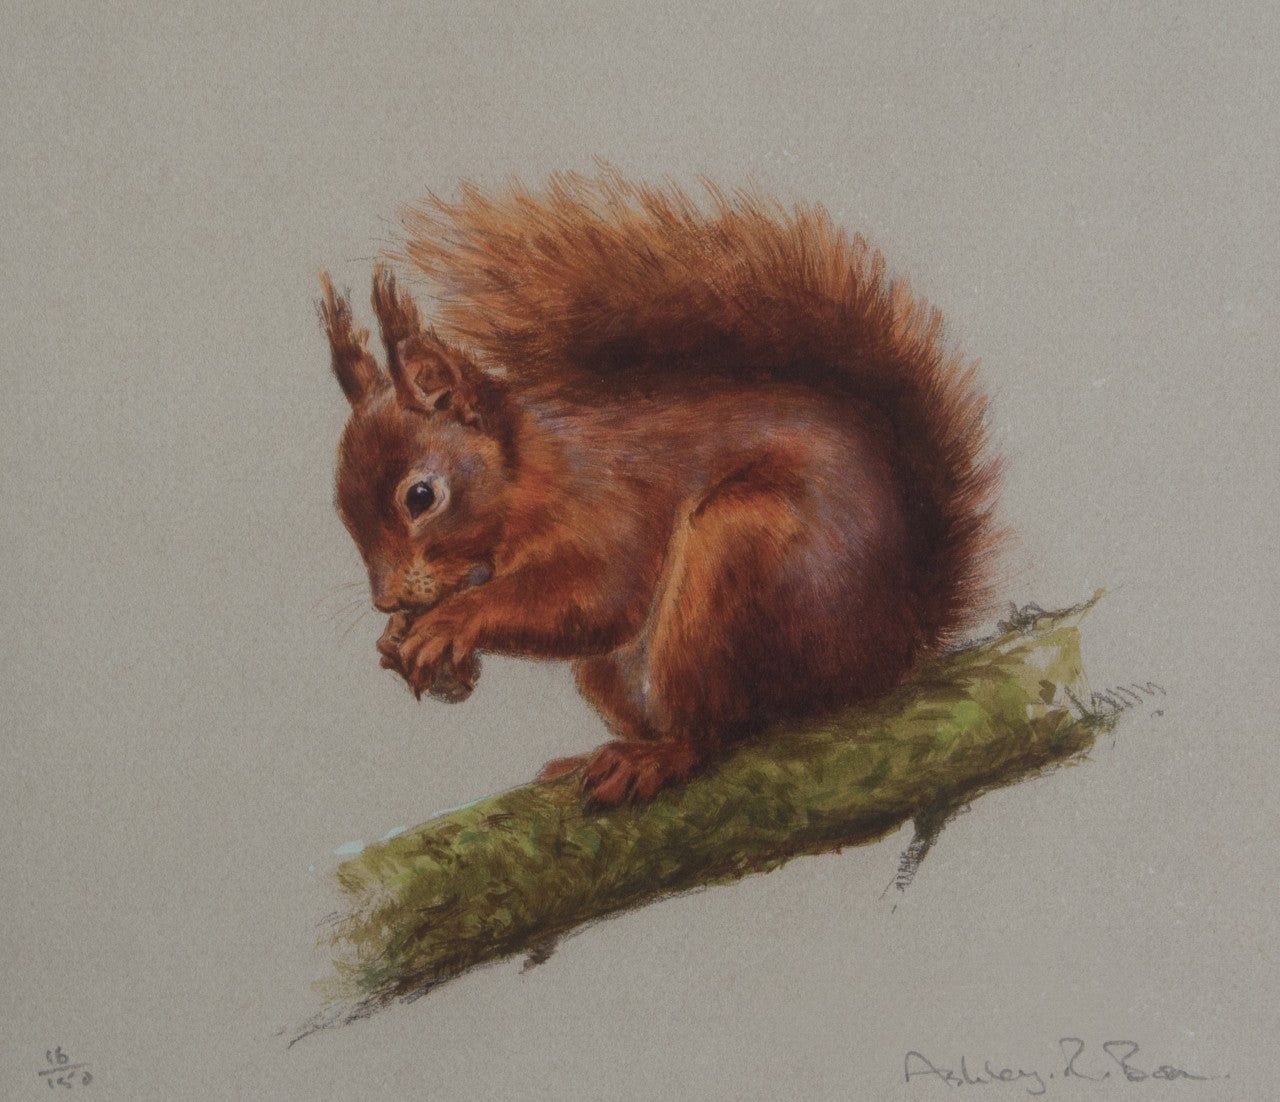 014. 'Red Squirrel' Limited Edition Print (150 only) by Ashley Boon - 8" x 9.5"